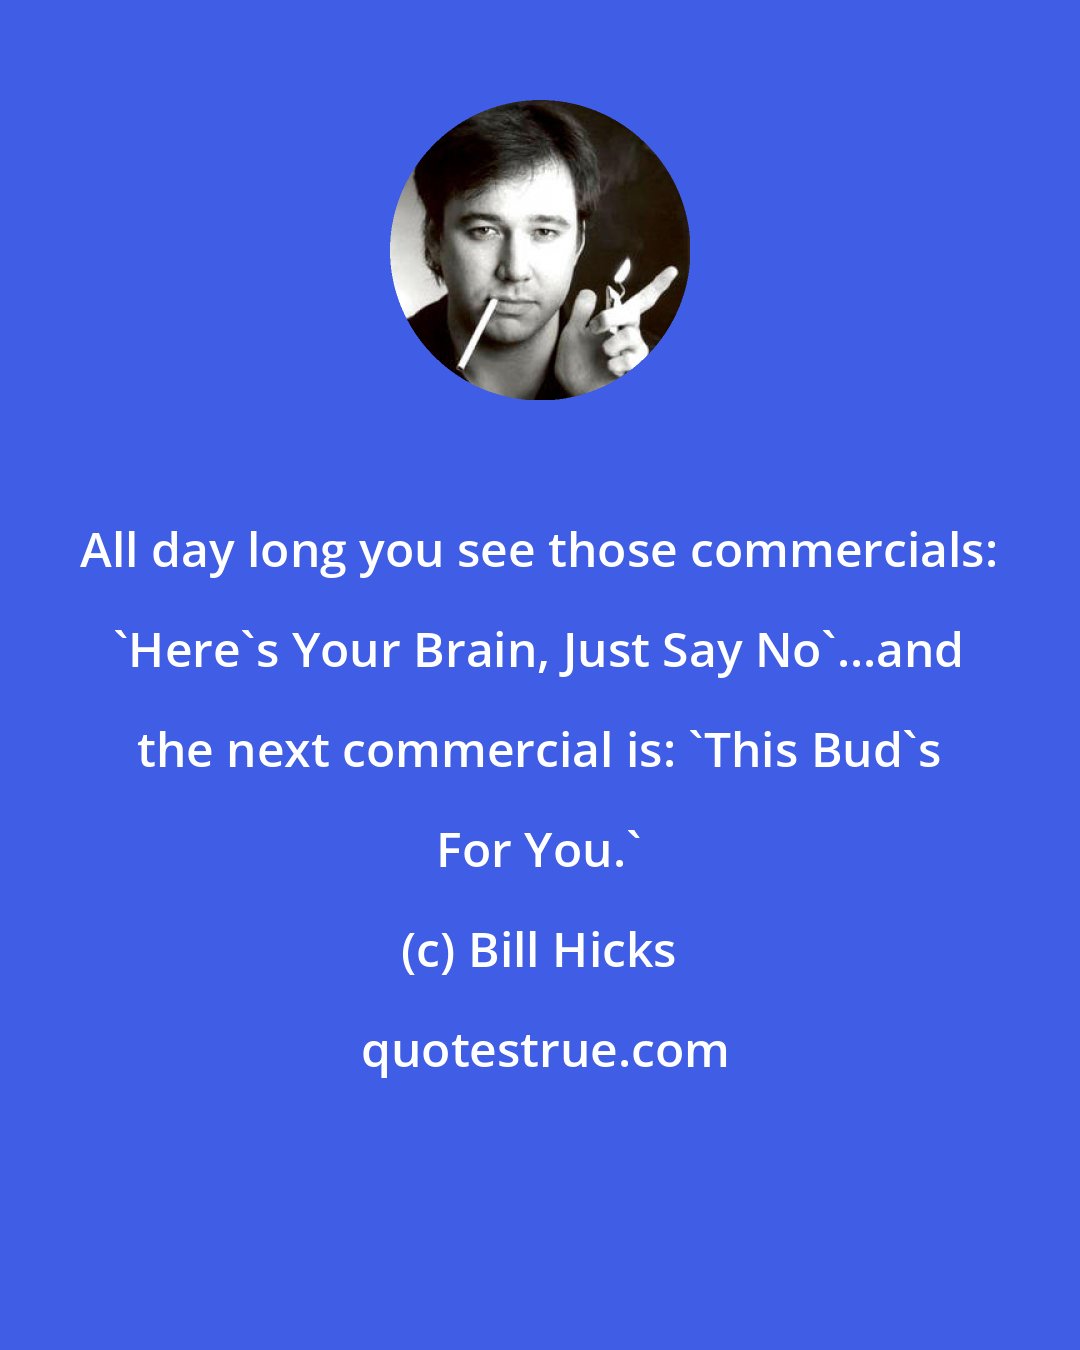 Bill Hicks: All day long you see those commercials: 'Here's Your Brain, Just Say No'...and the next commercial is: 'This Bud's For You.'